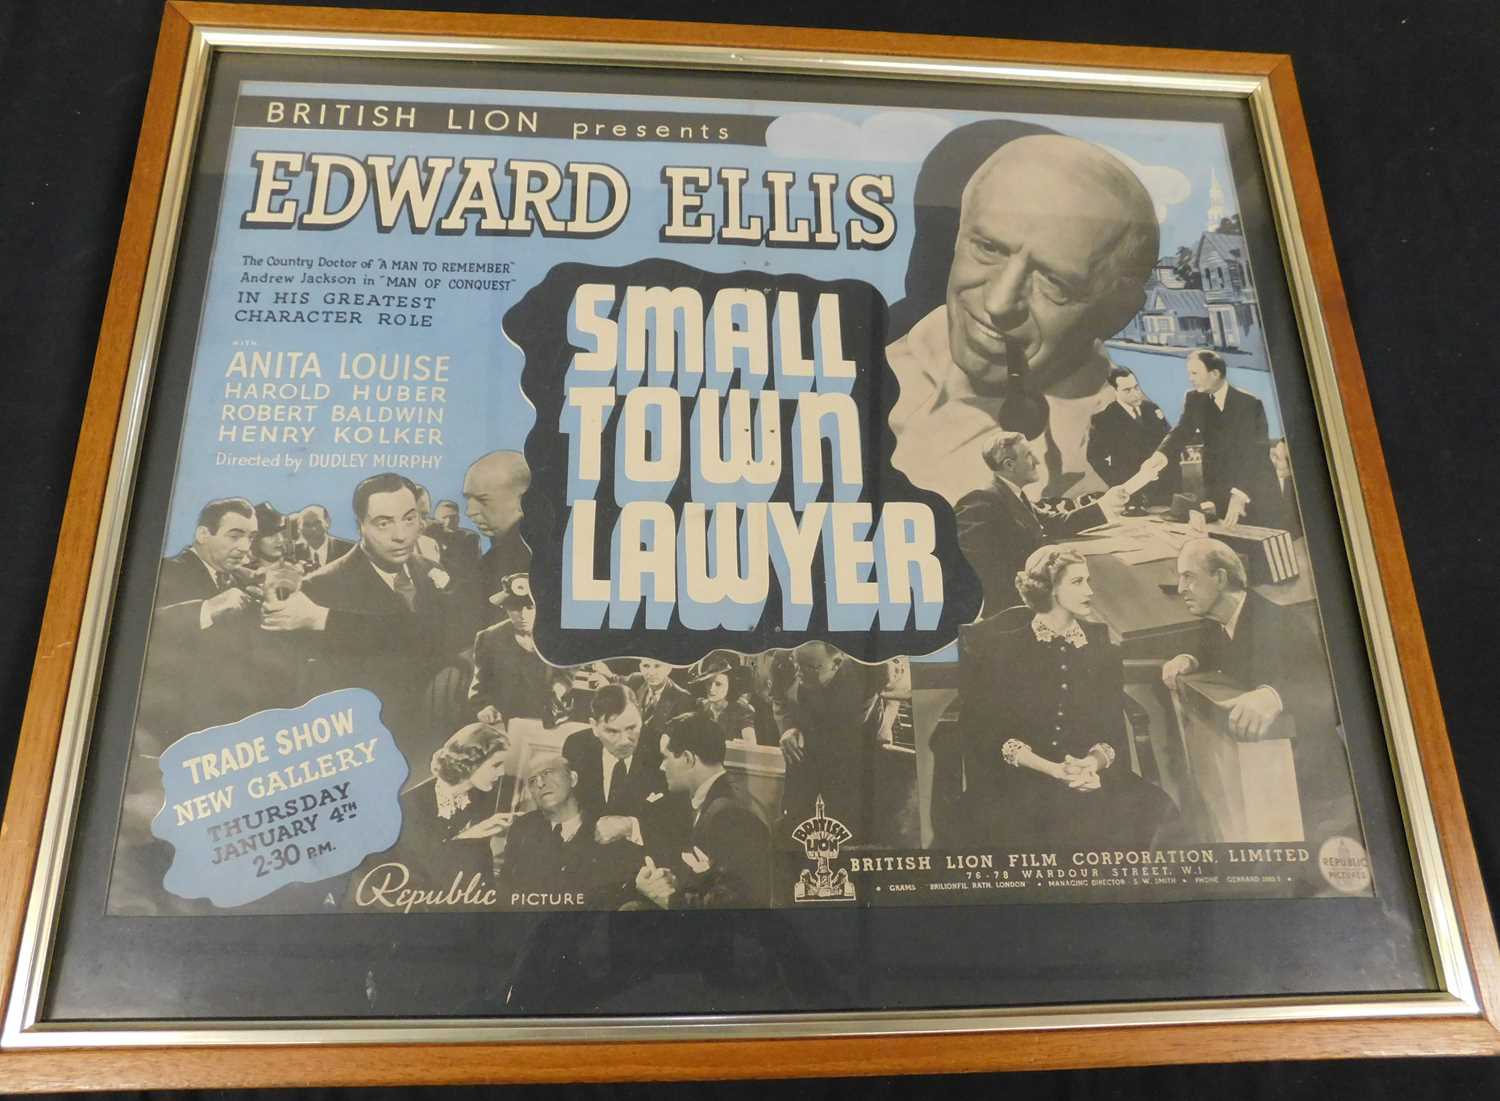 SMALL TOWN LAWYER, coloured film poster starring Edward Ellis, approx 430 x 550mm, f/g